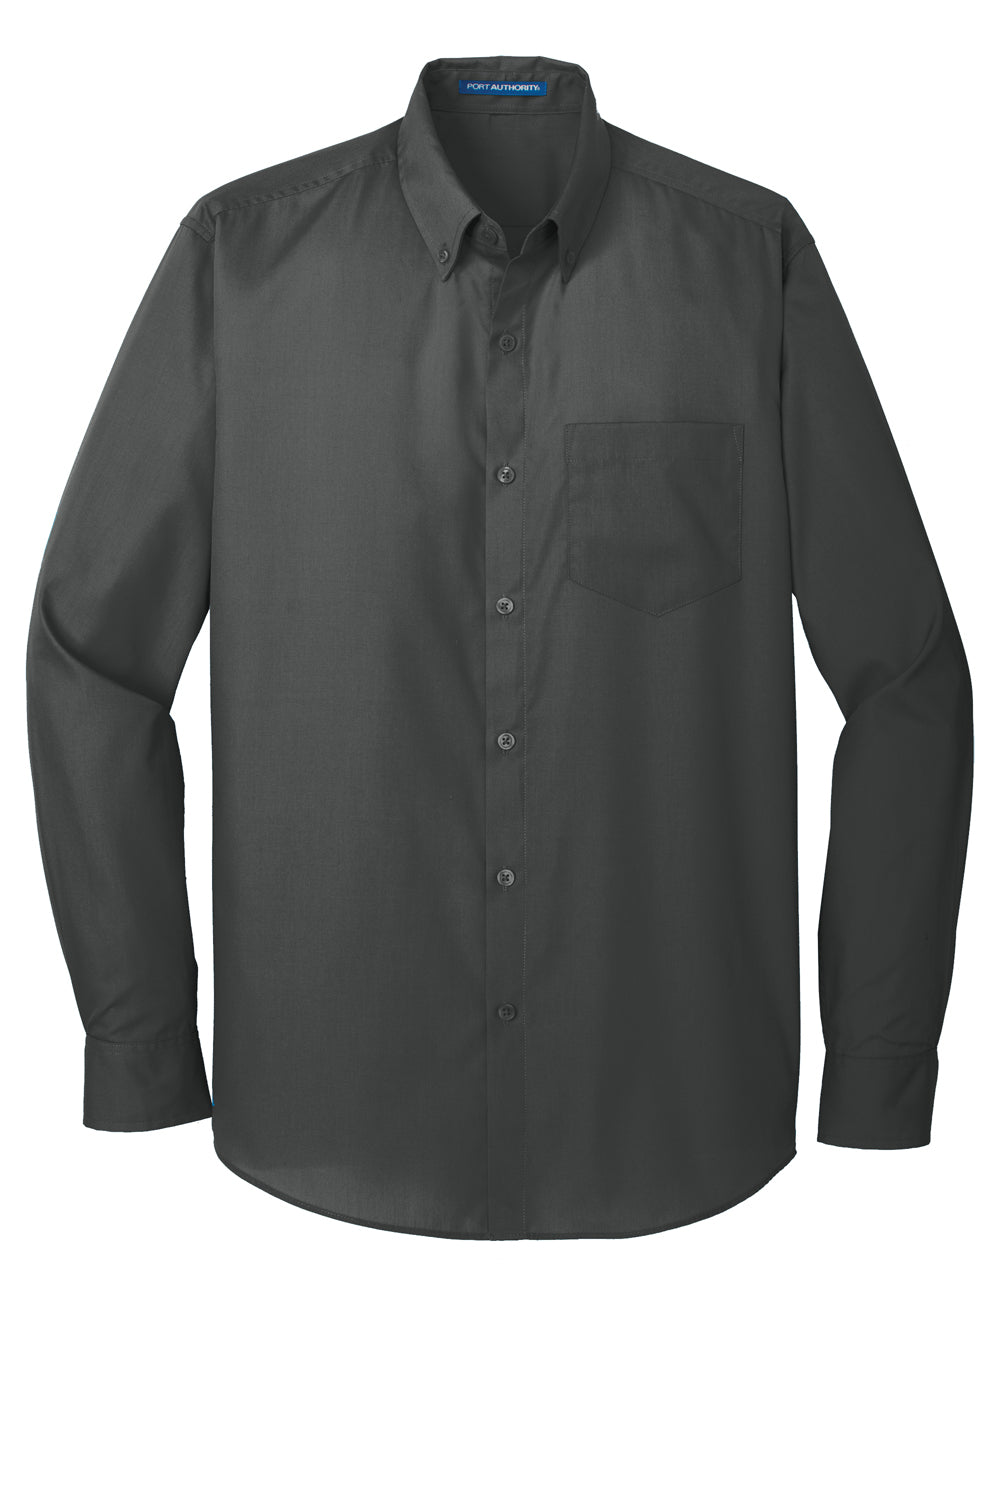 Port Authority W100/TW100 Carefree Stain Resistant Long Sleeve Button Down Shirt w/ Pocket Graphite Grey Flat Front